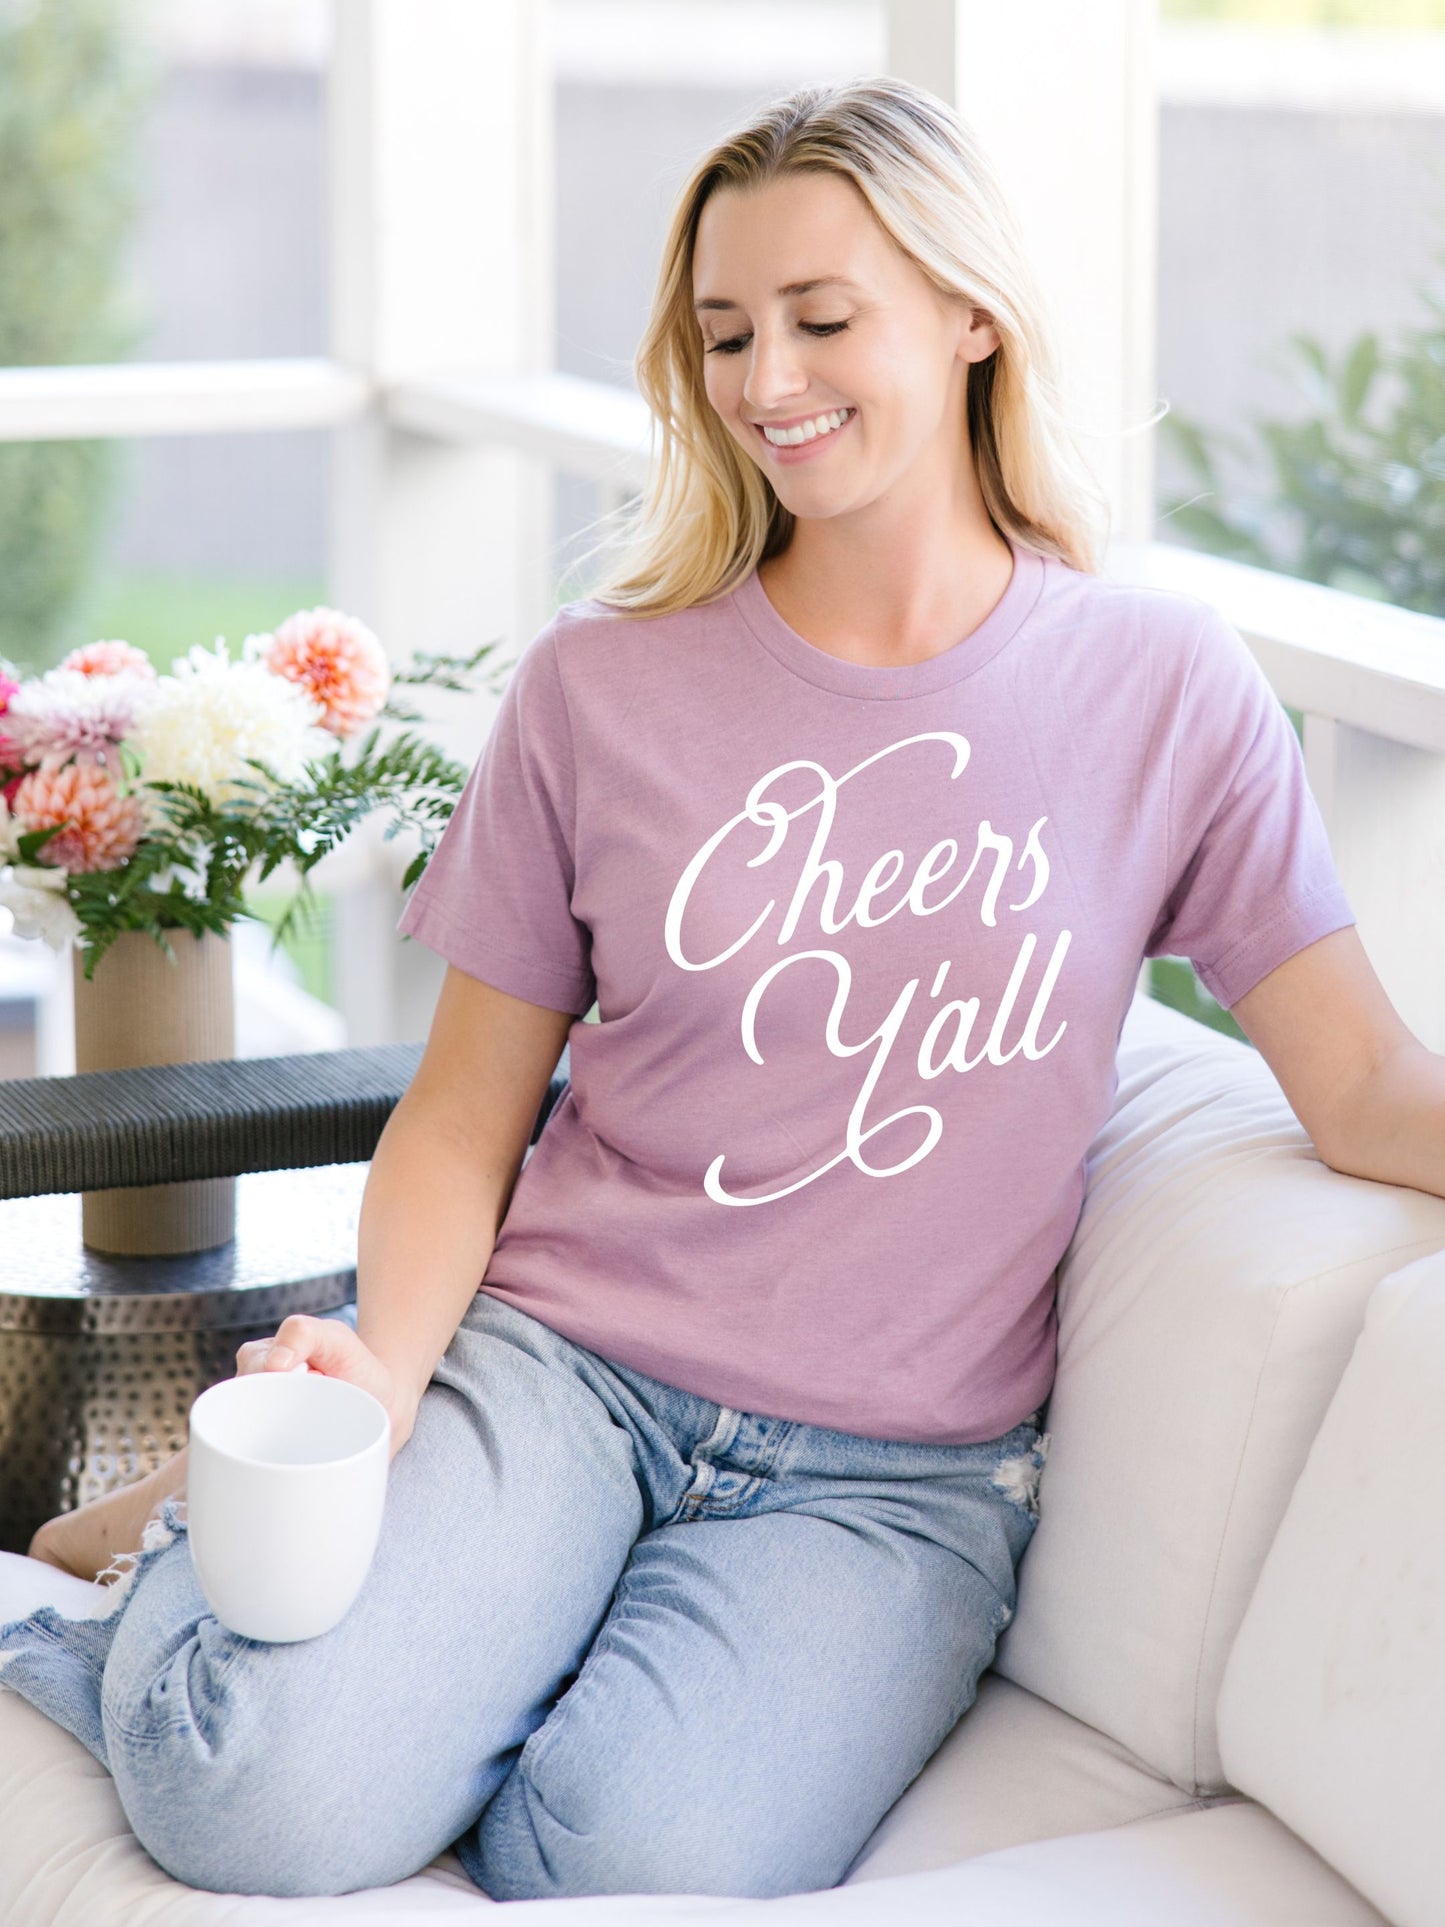 Cheers Y'all T-Shirt for girls trip or bachelorette party